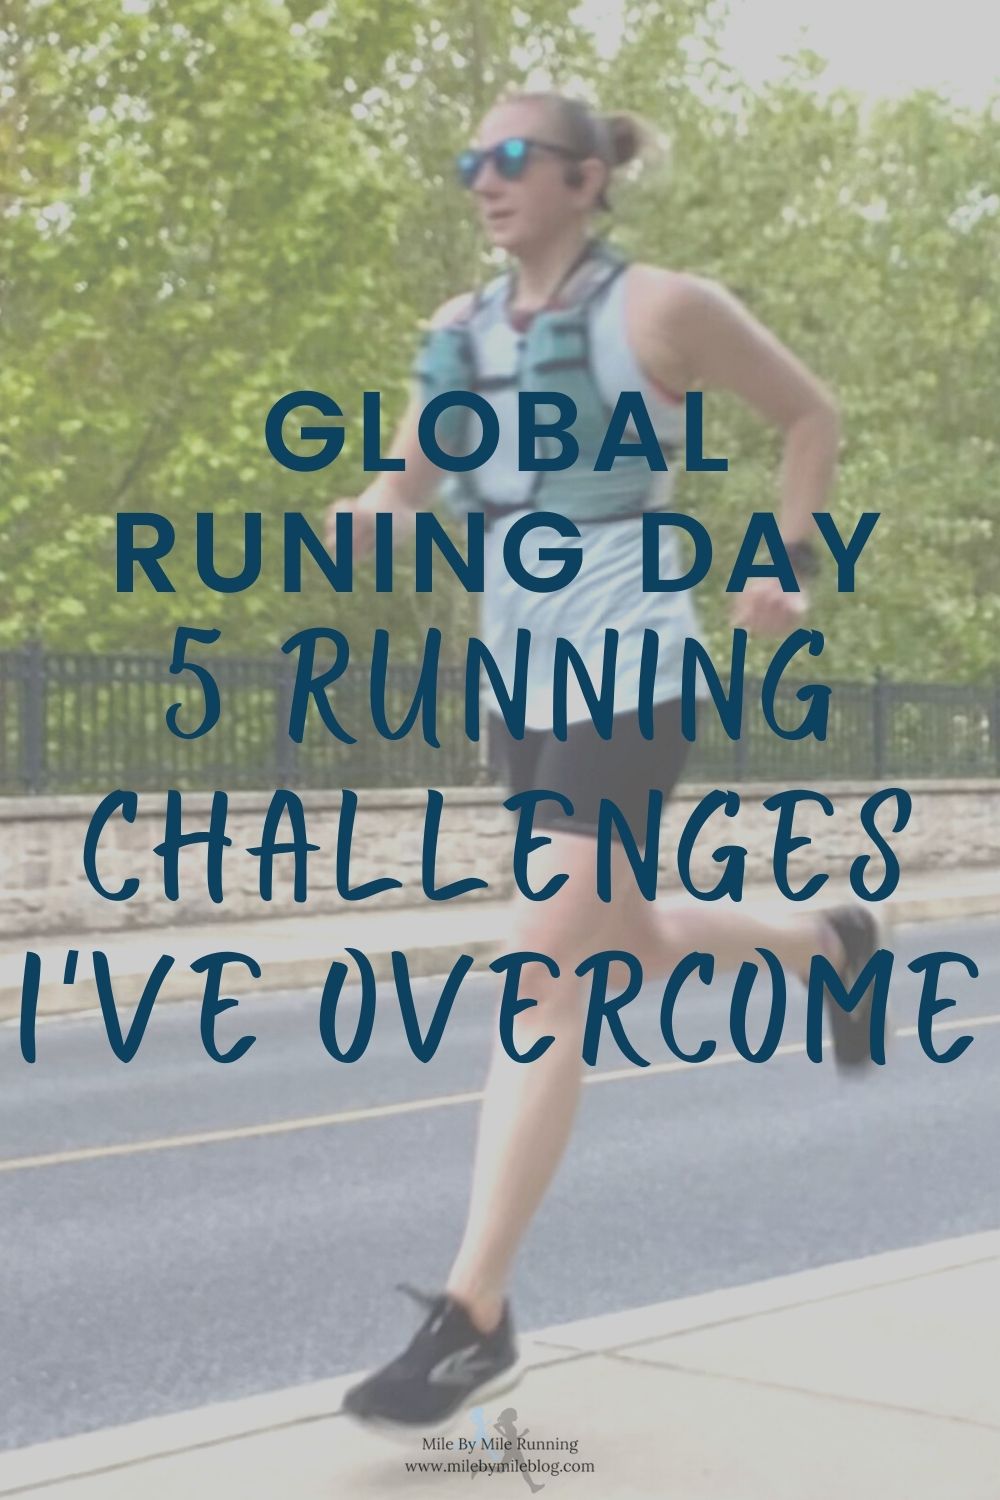 I like to use Global Running Day as a chance to appreciate running and think about what it means to me. That usually includes thinking back on my running over the years. This year I've been thinking about running challenges I've overcome. 